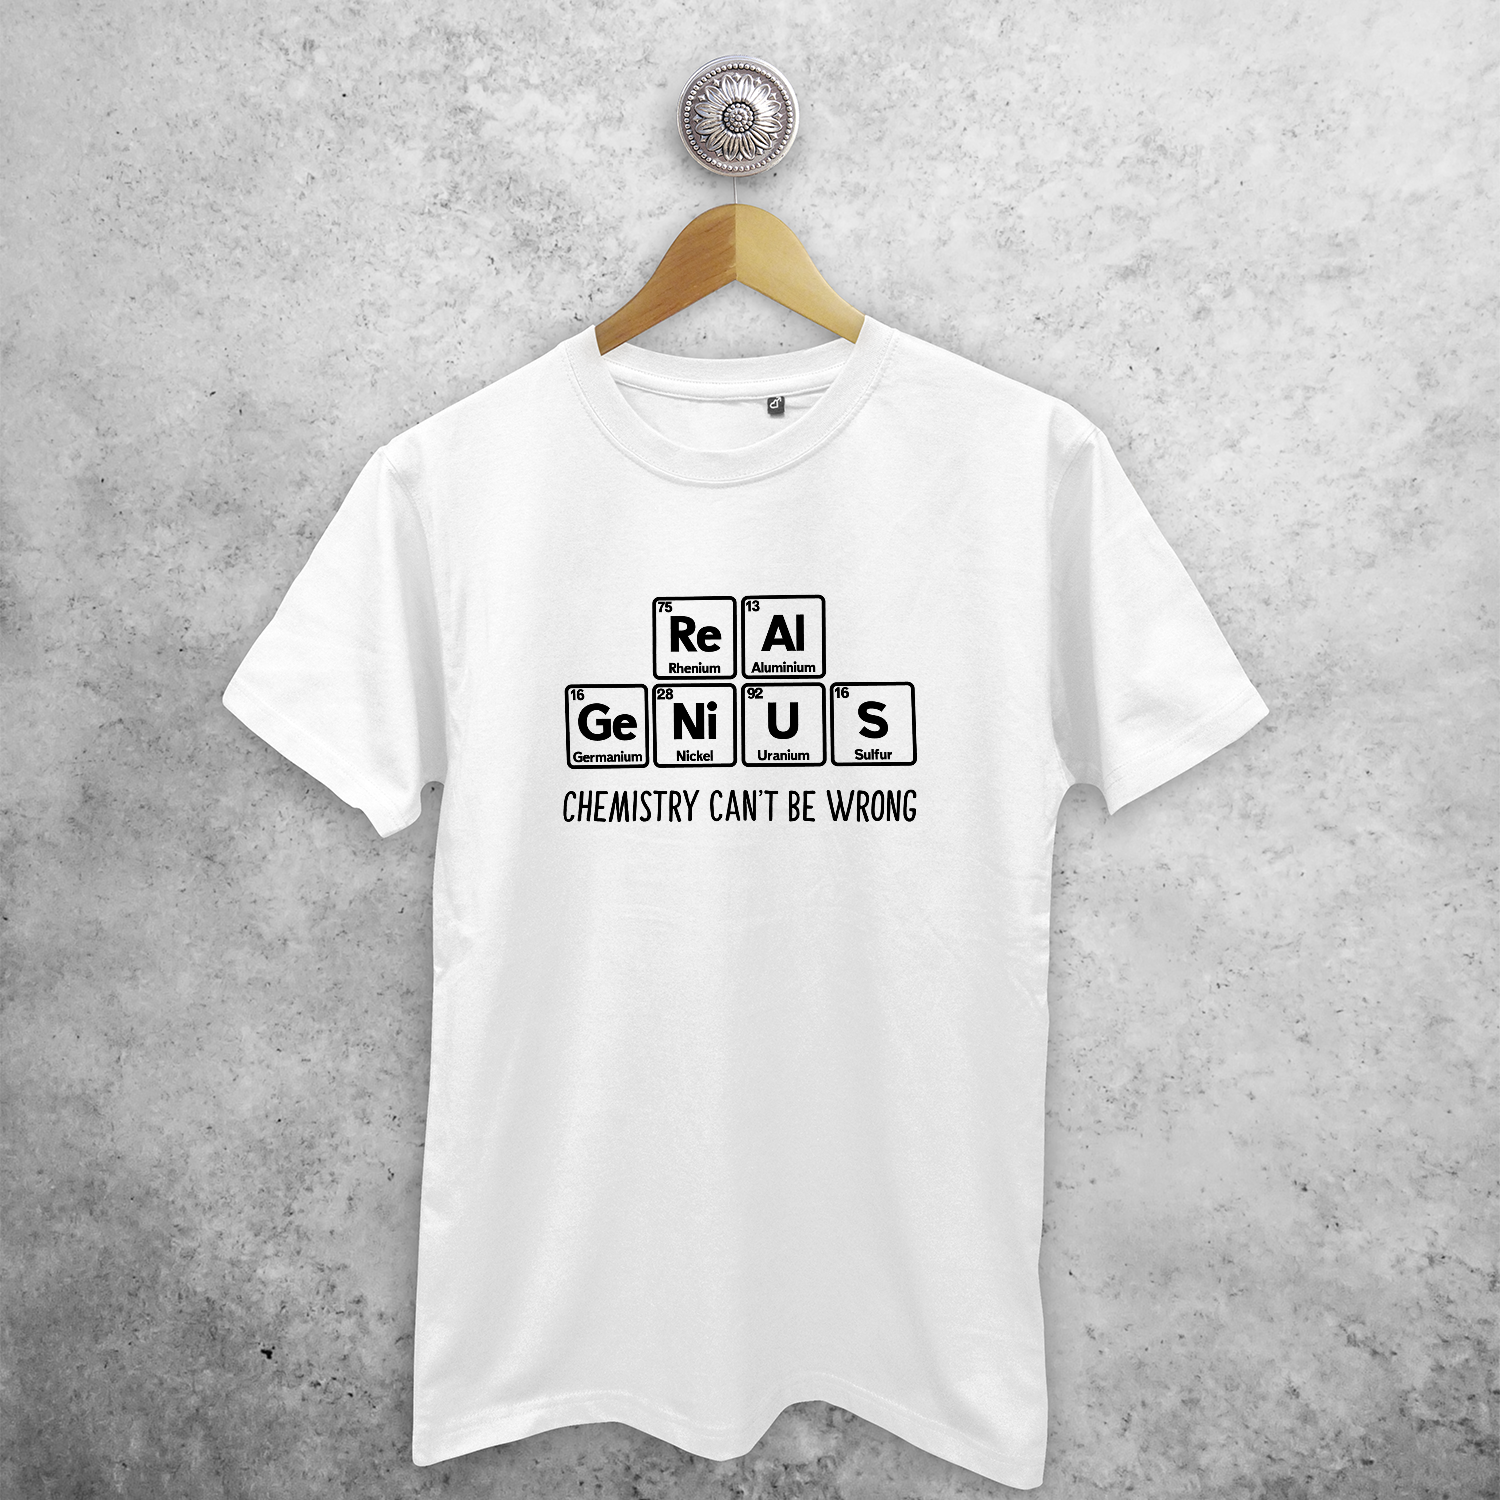 'Real genius - Chemistry can't be wrong' adult shirt